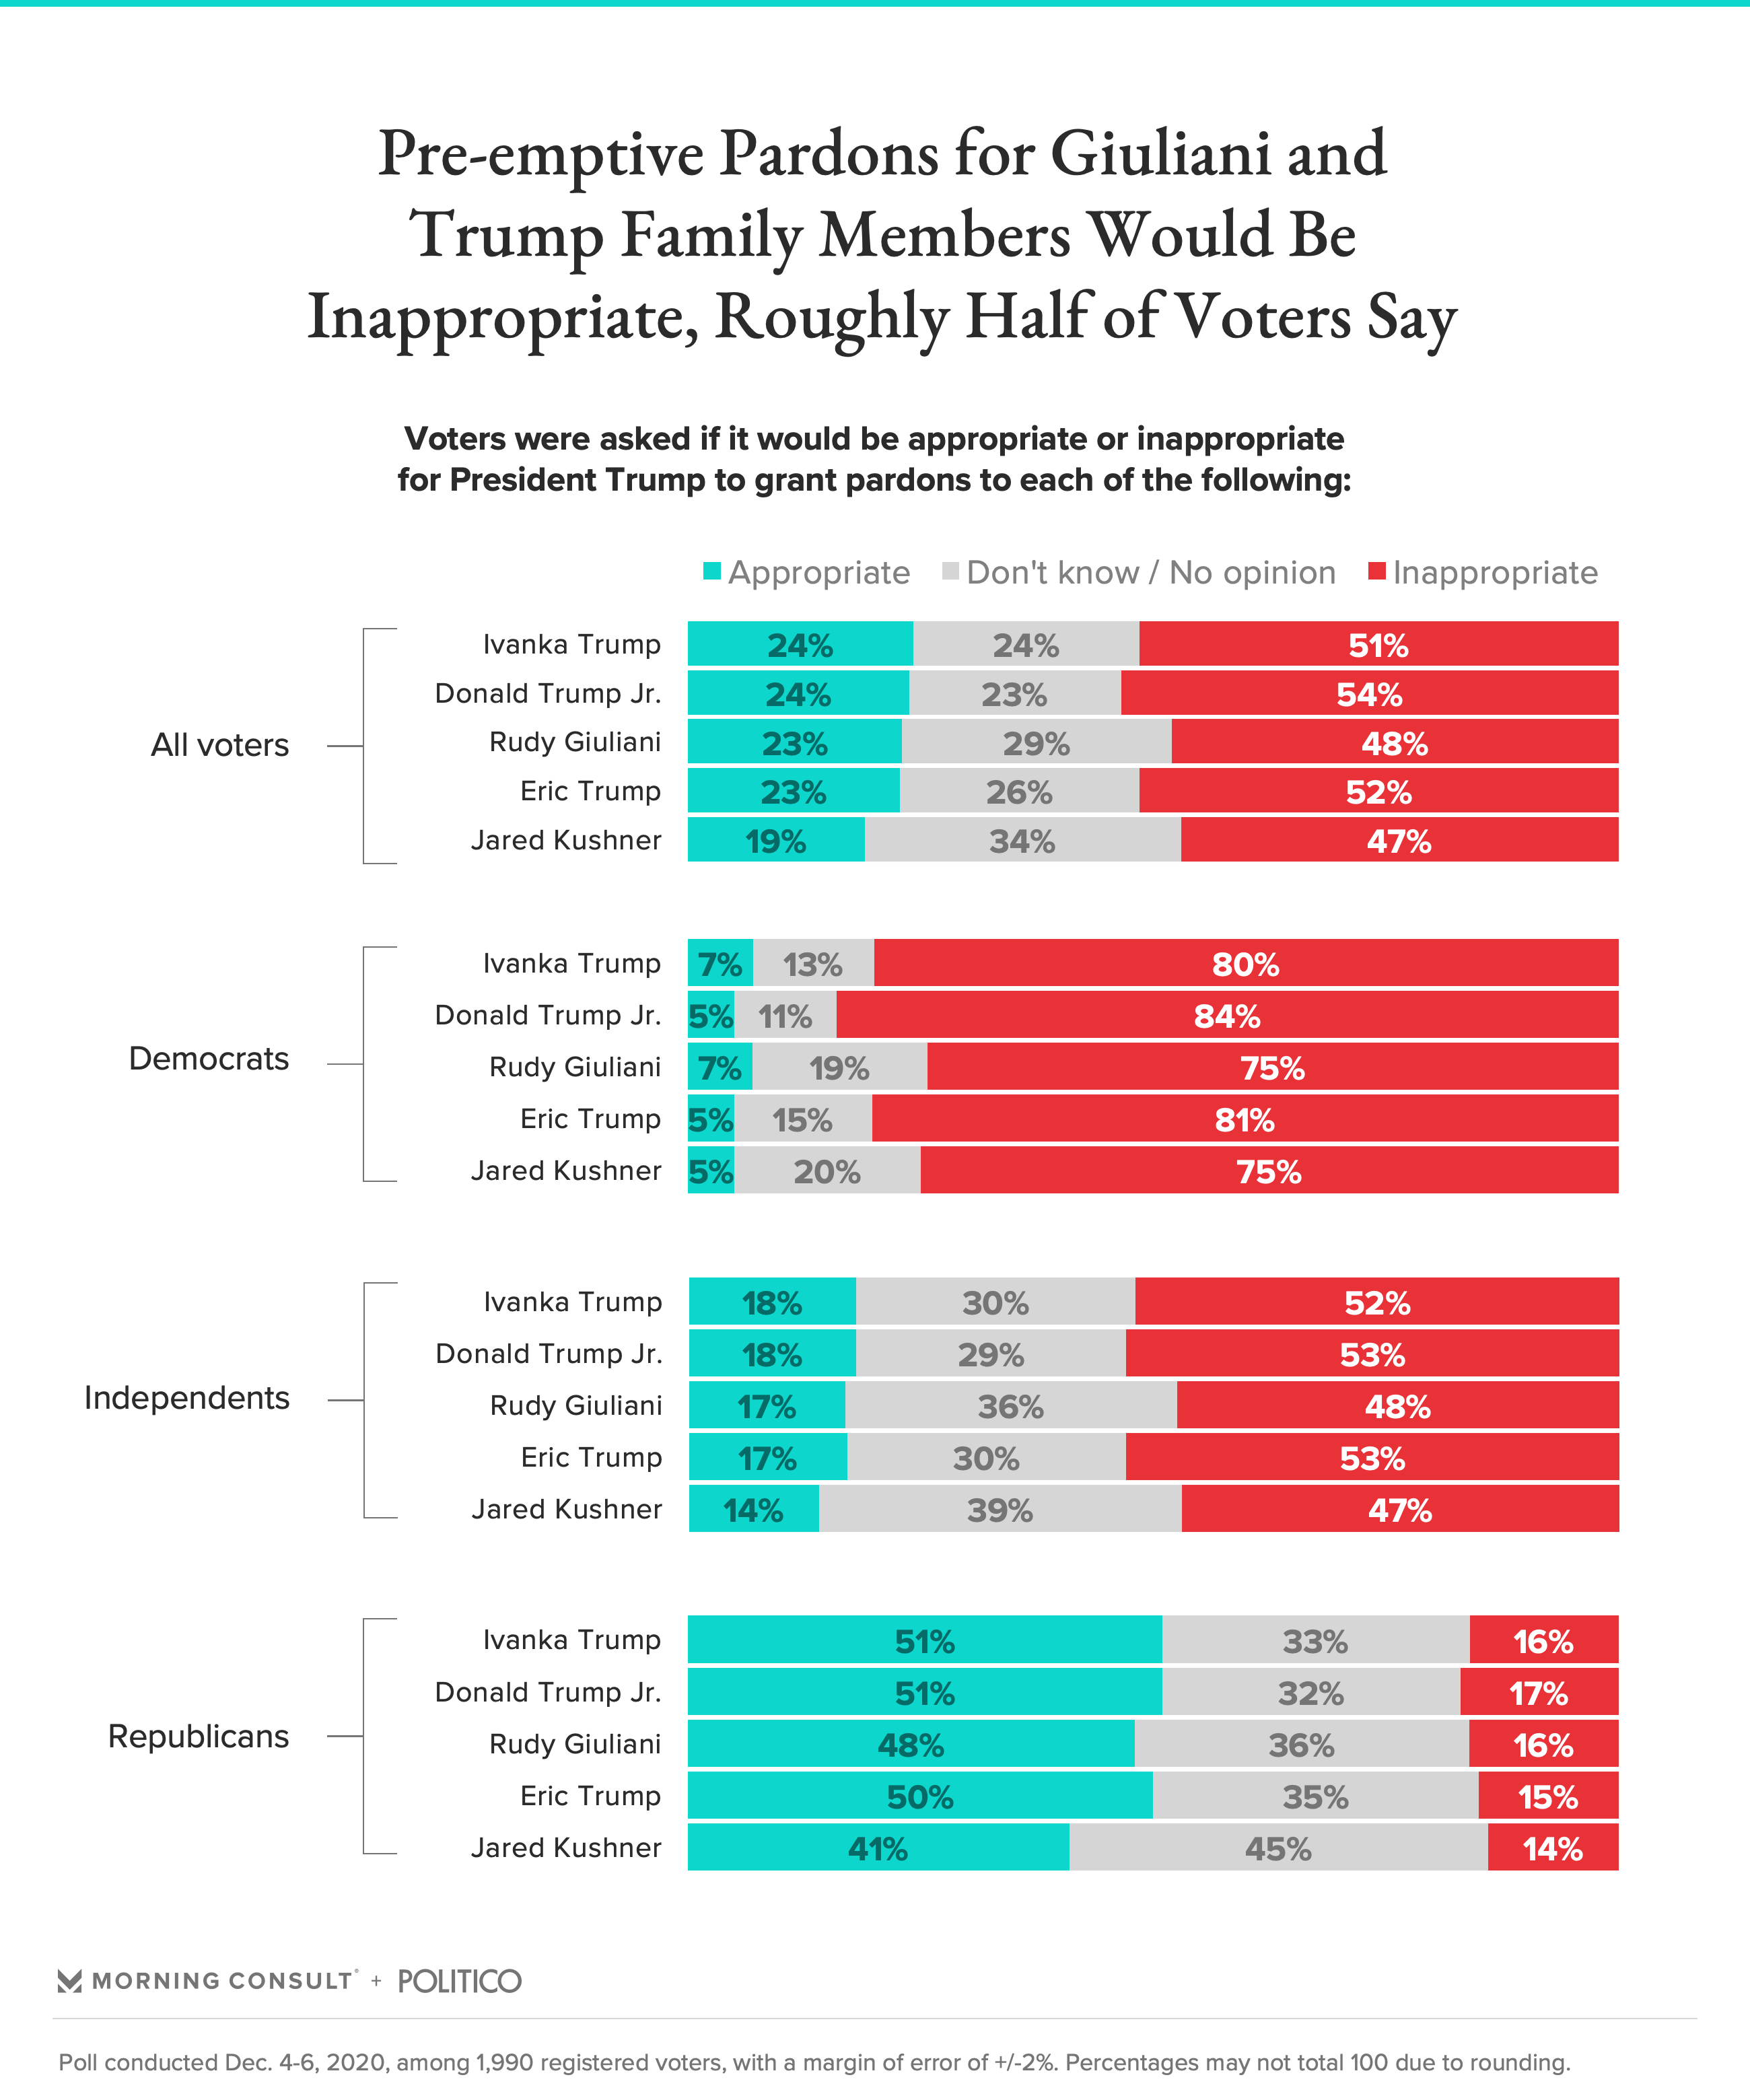 Potential Pardons For Trump Family Members Are Unpopular With Voters